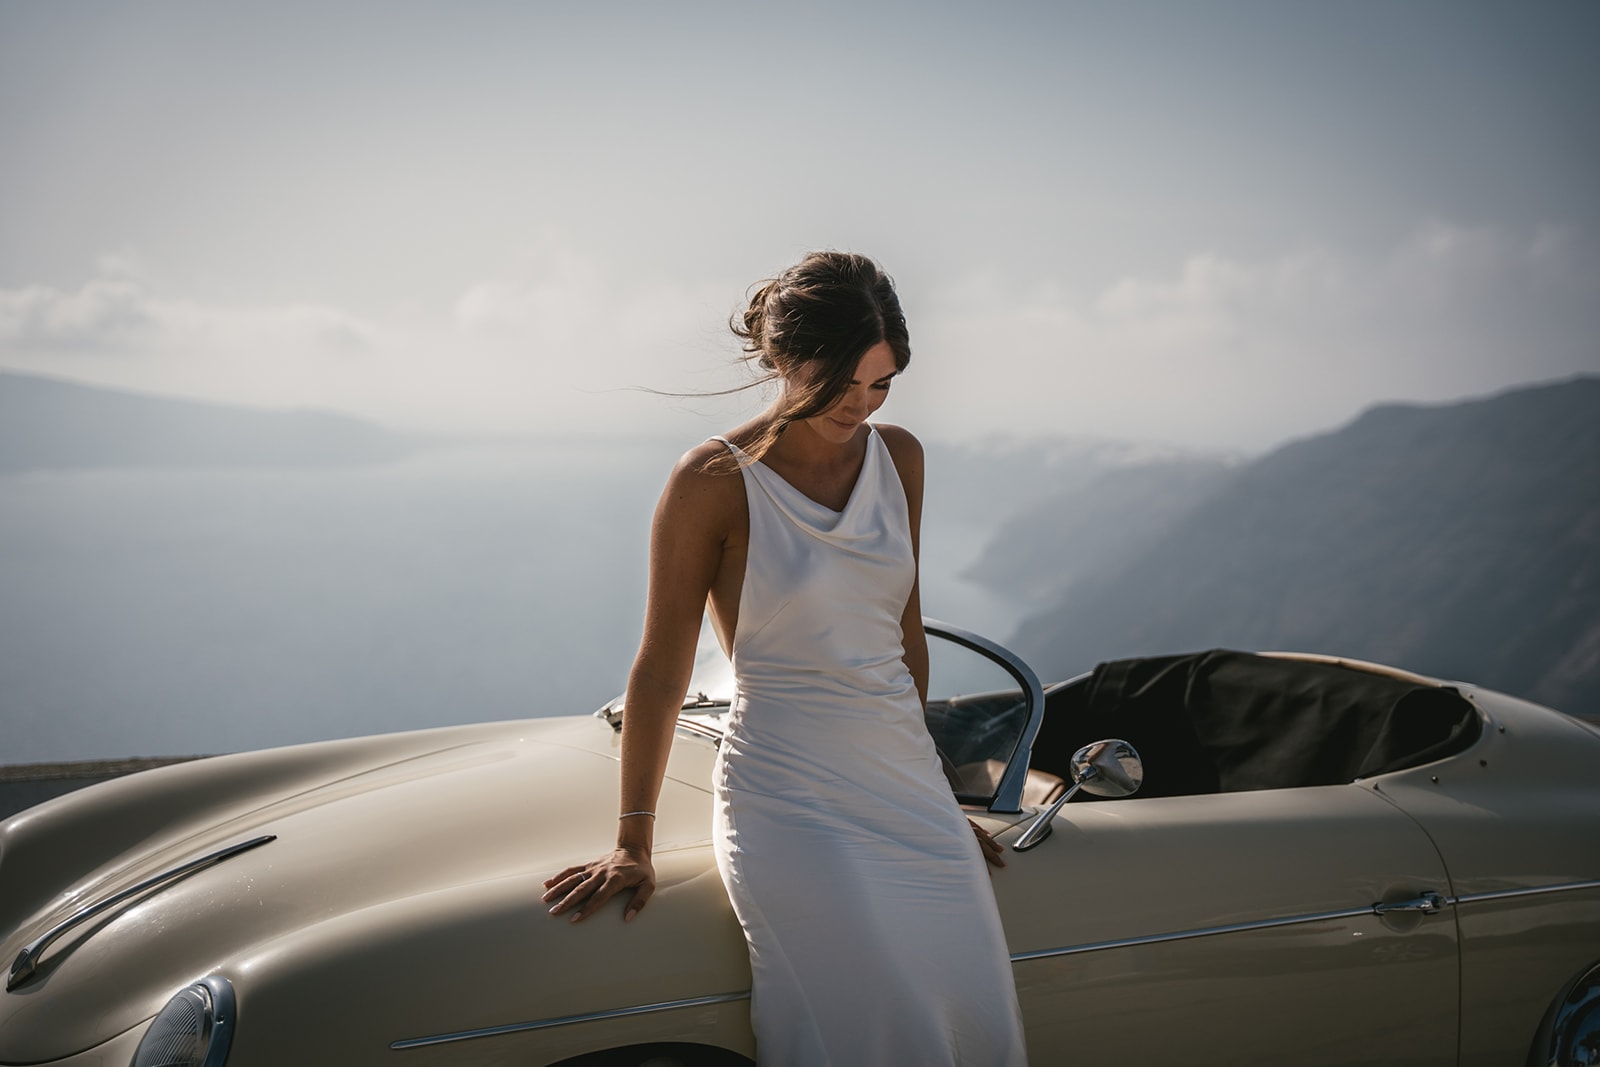 As the waves dance behind, their love story unfolds in the embrace of the vintage car